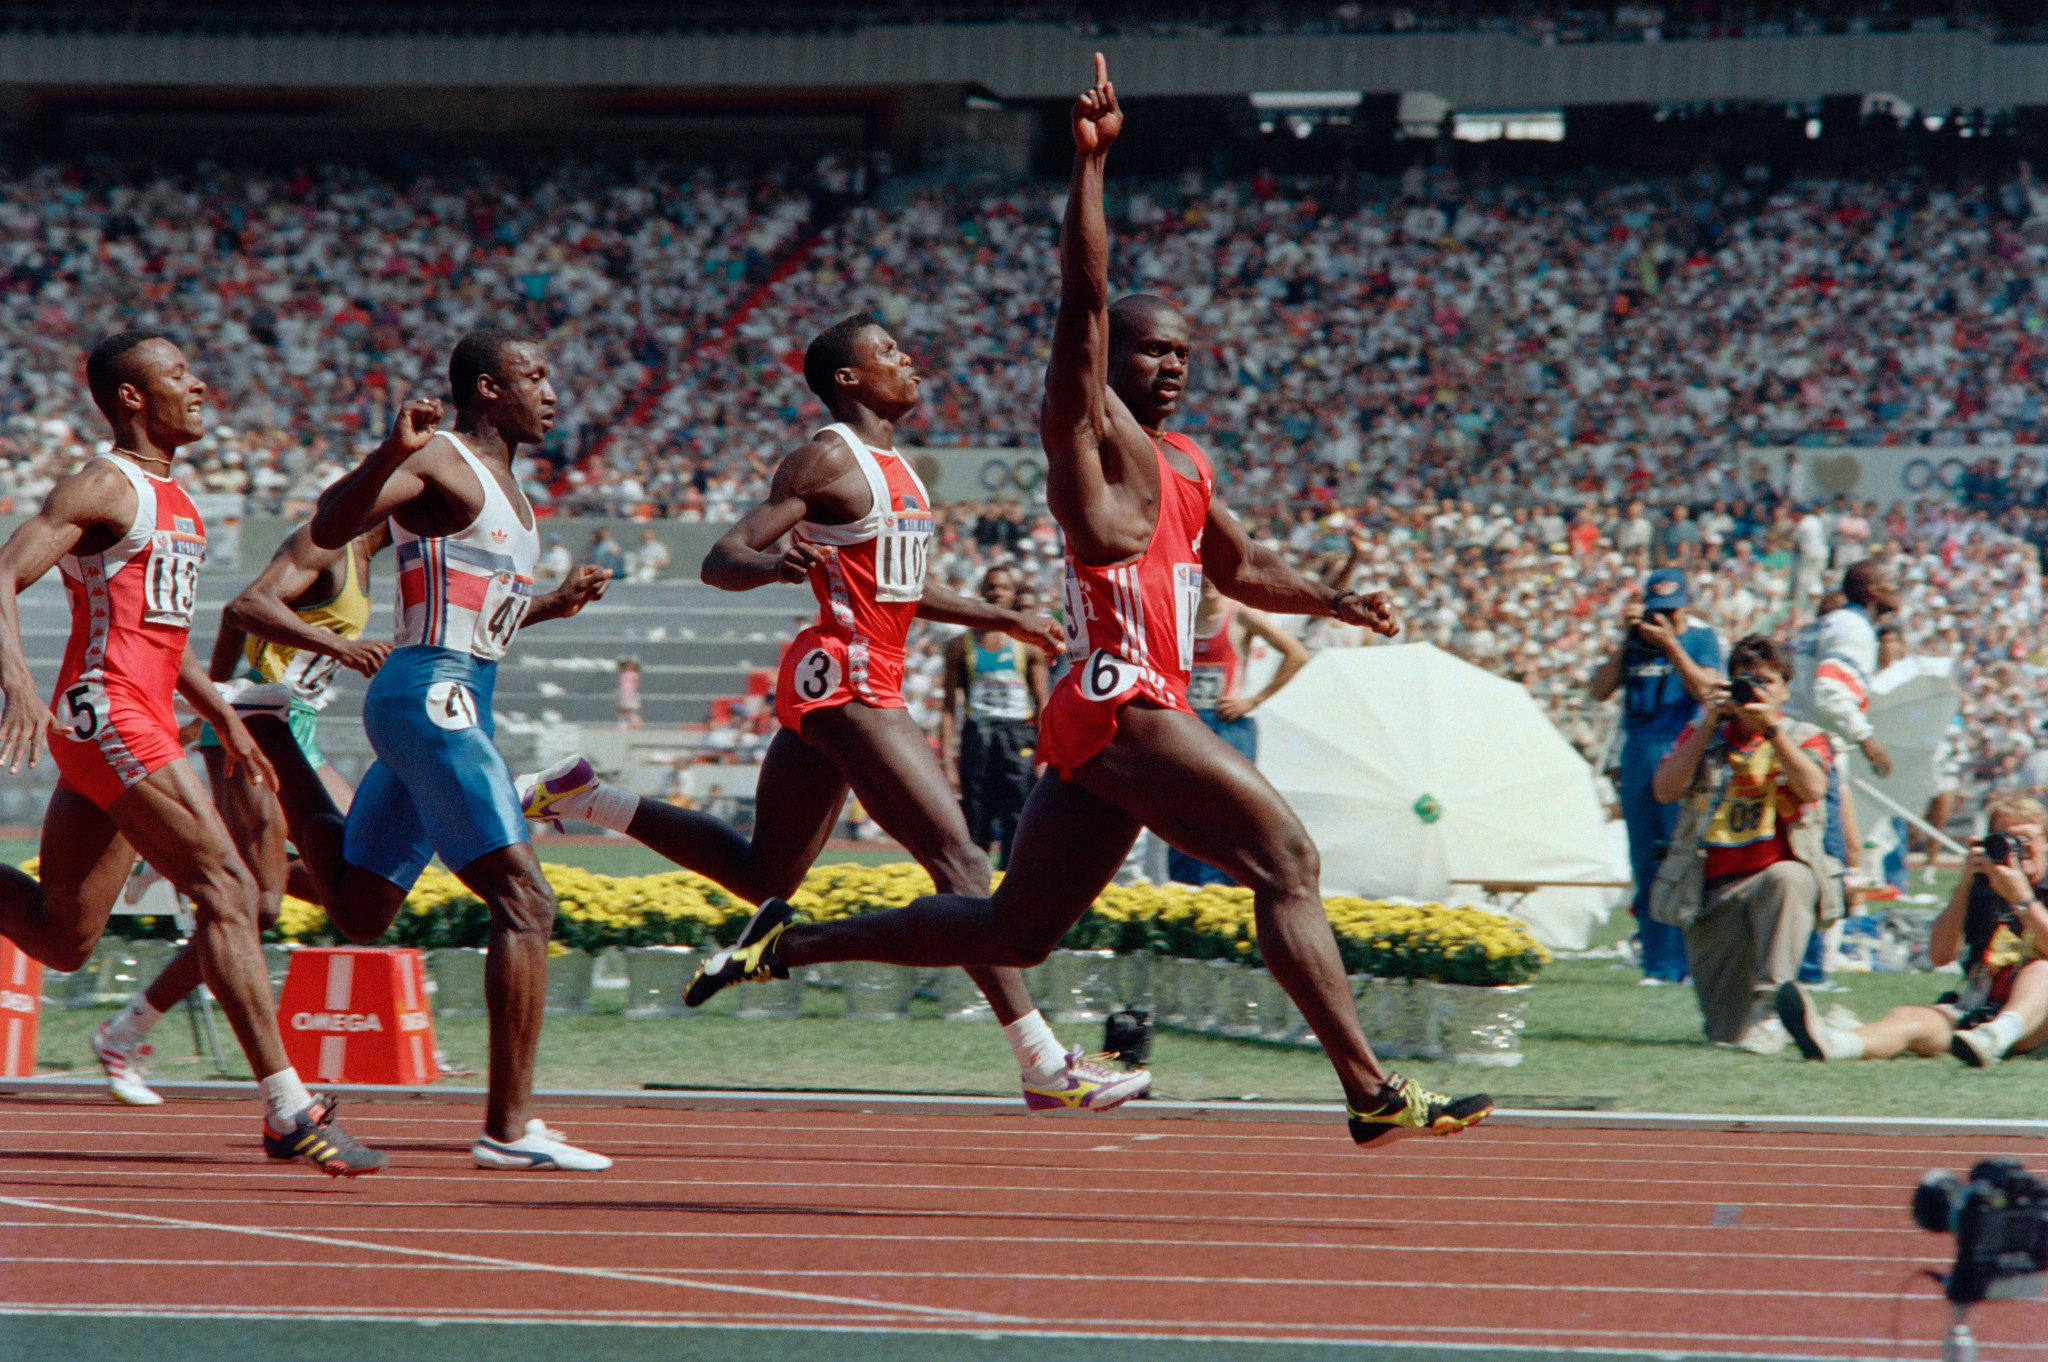 Stanozolol was the anabolic steroid that Ben Johnson tested positive for at the Seoul 1988 Olympic Games ©Getty Images